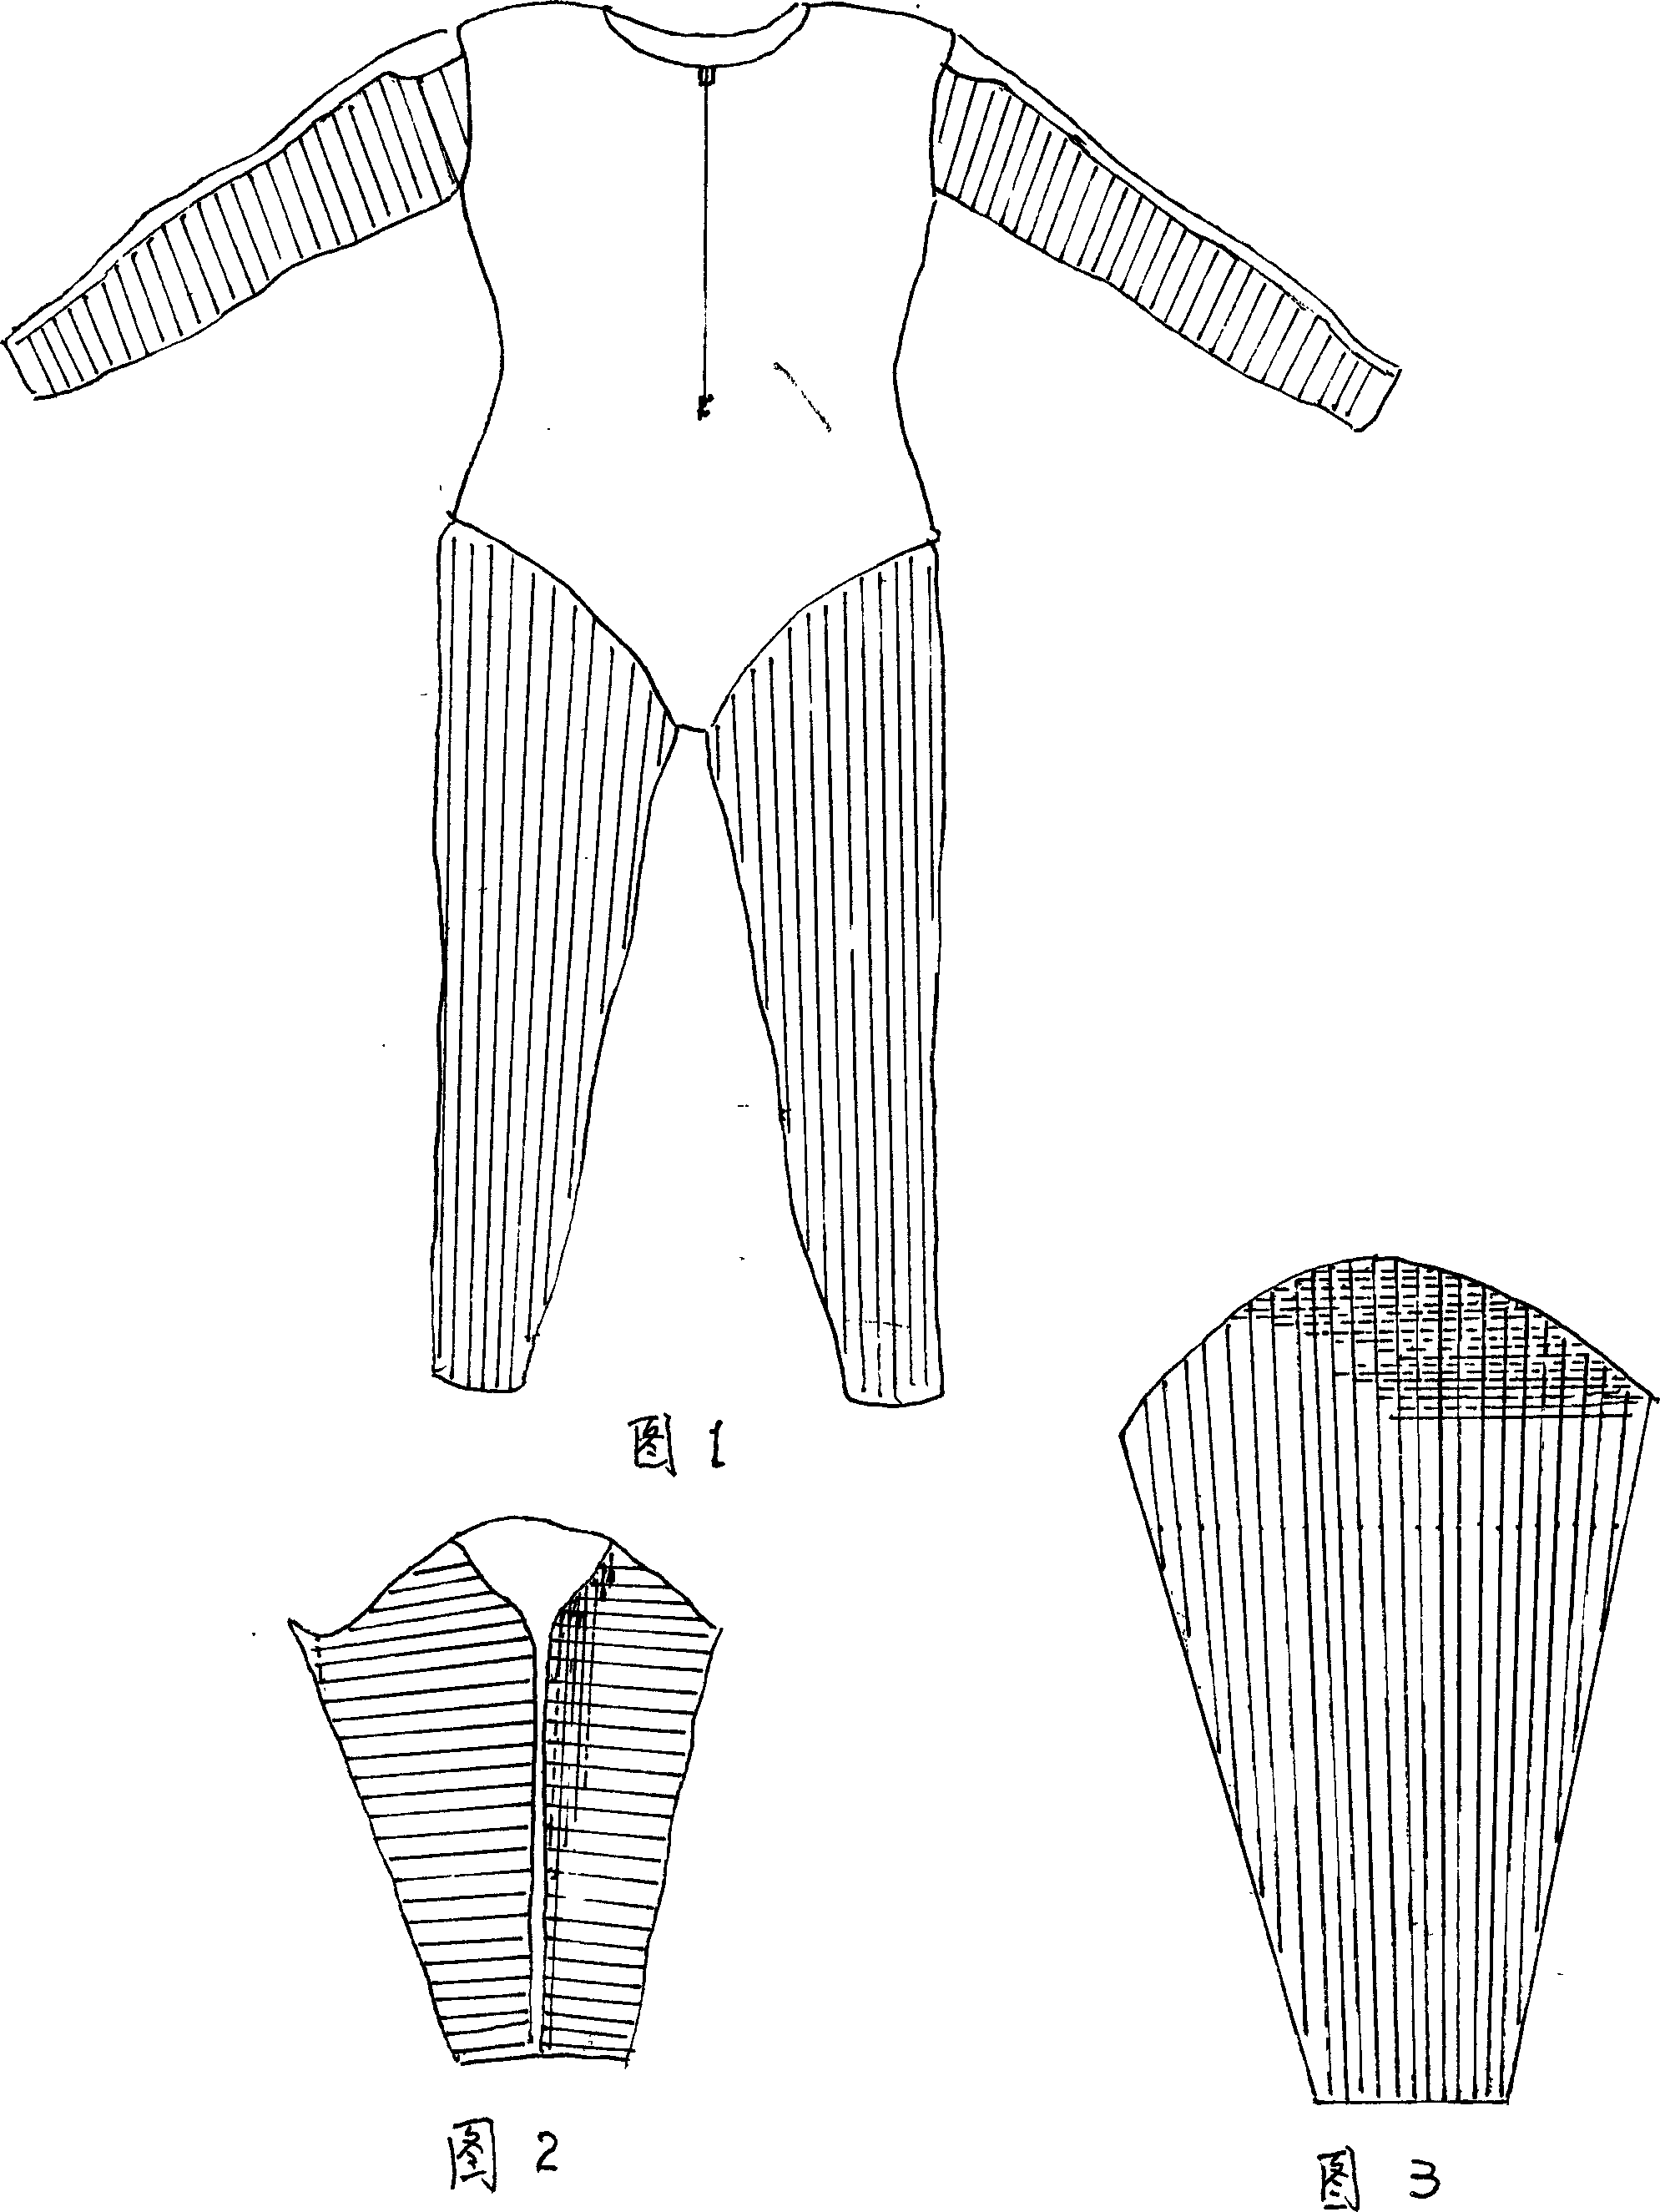 Feather and scale pattern designed swim suit and processing technique thereof